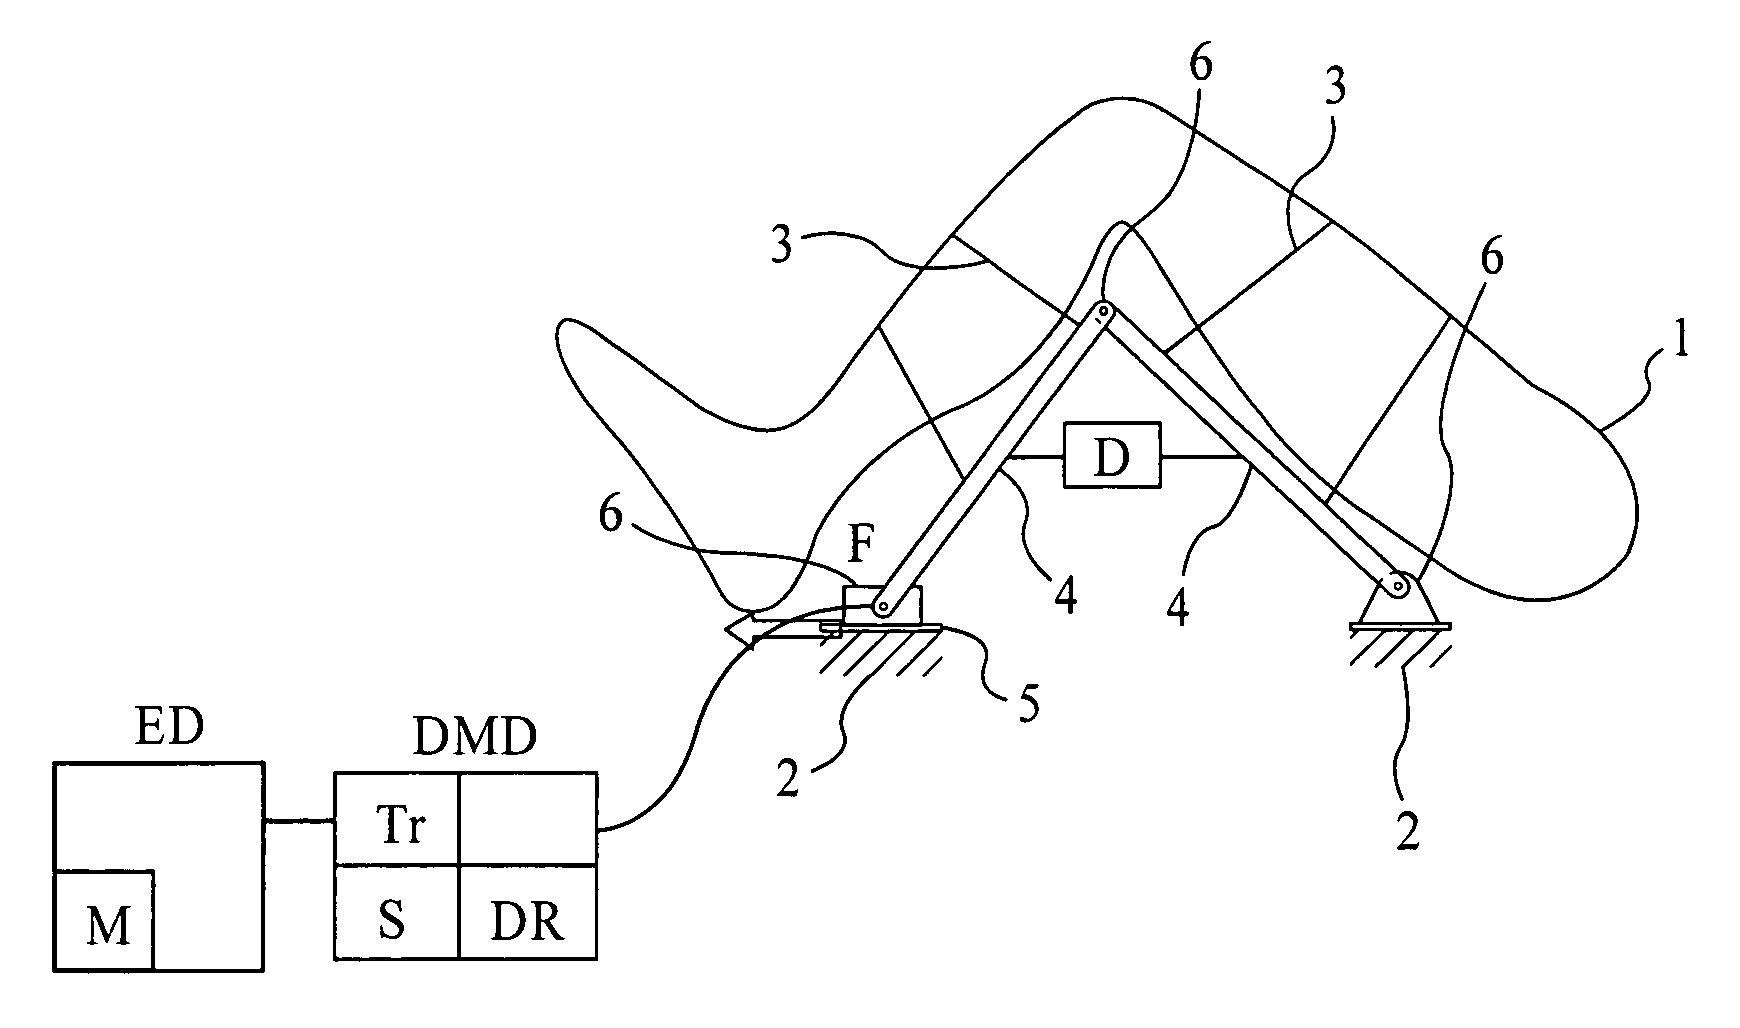 Continuous passive motion exercise system with driven monitoring